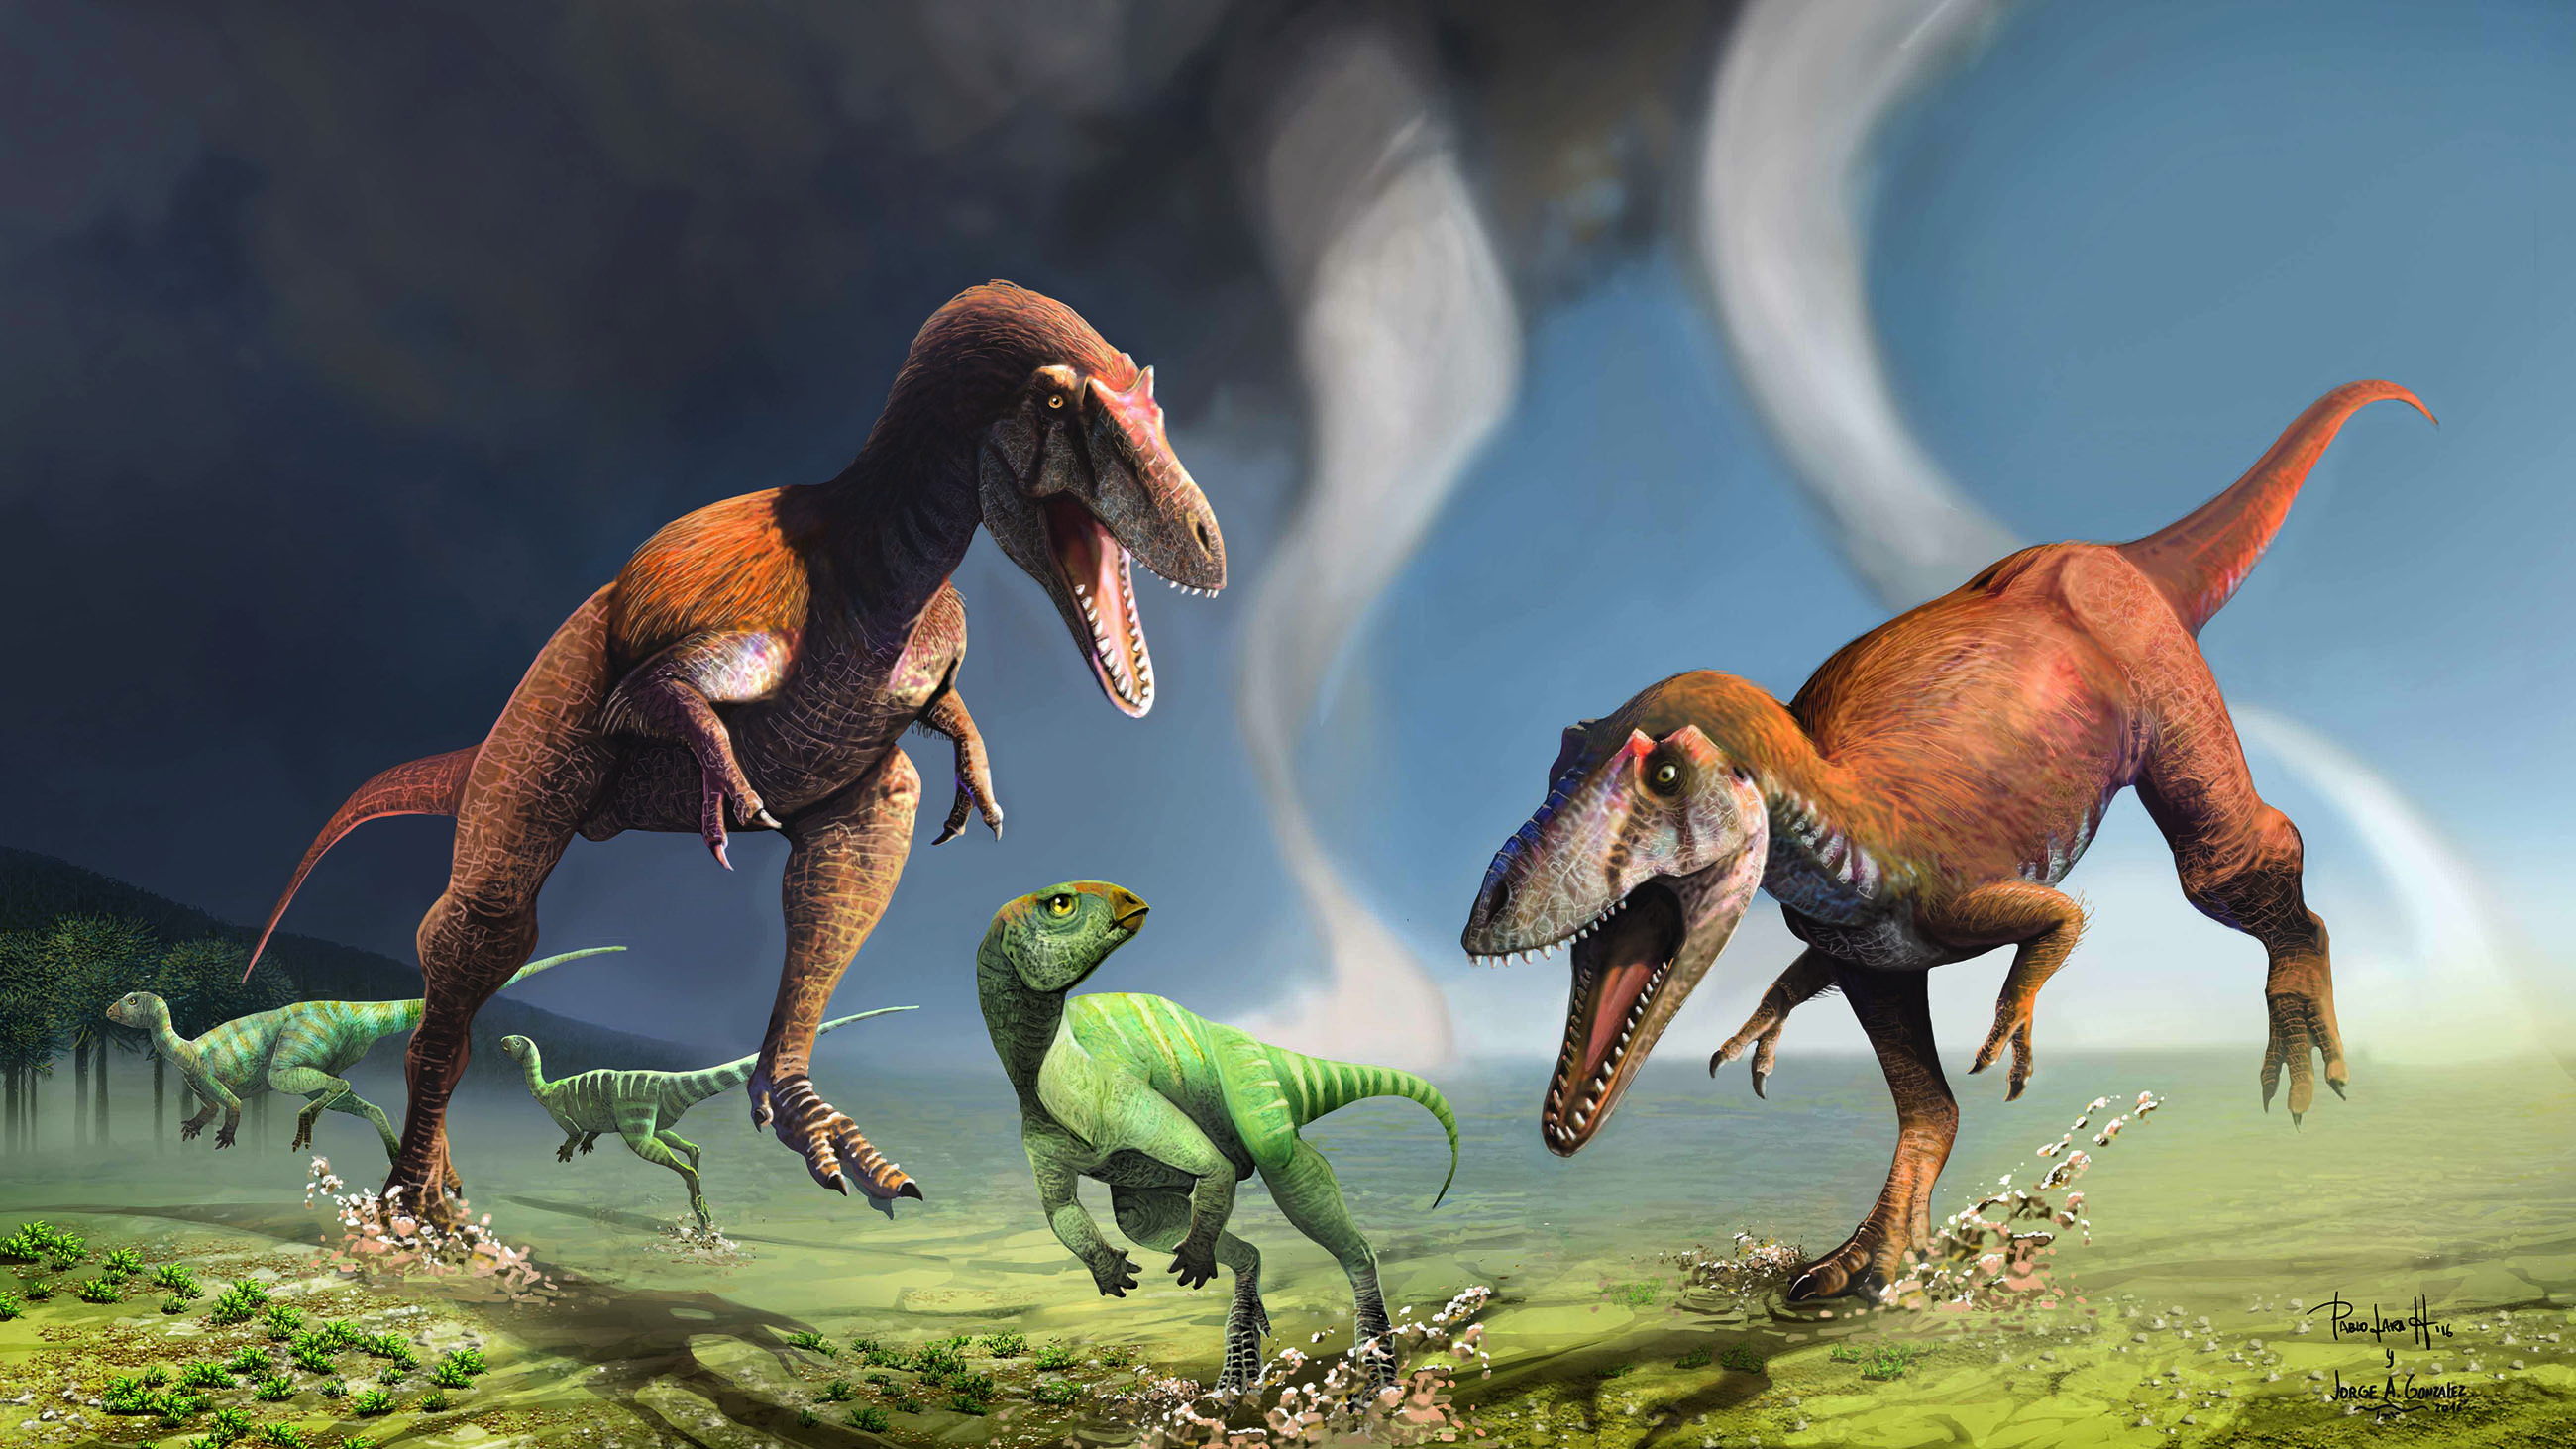 The newly discovered dinosaur had arms similar to those of the Tyrannosaurus Rex.